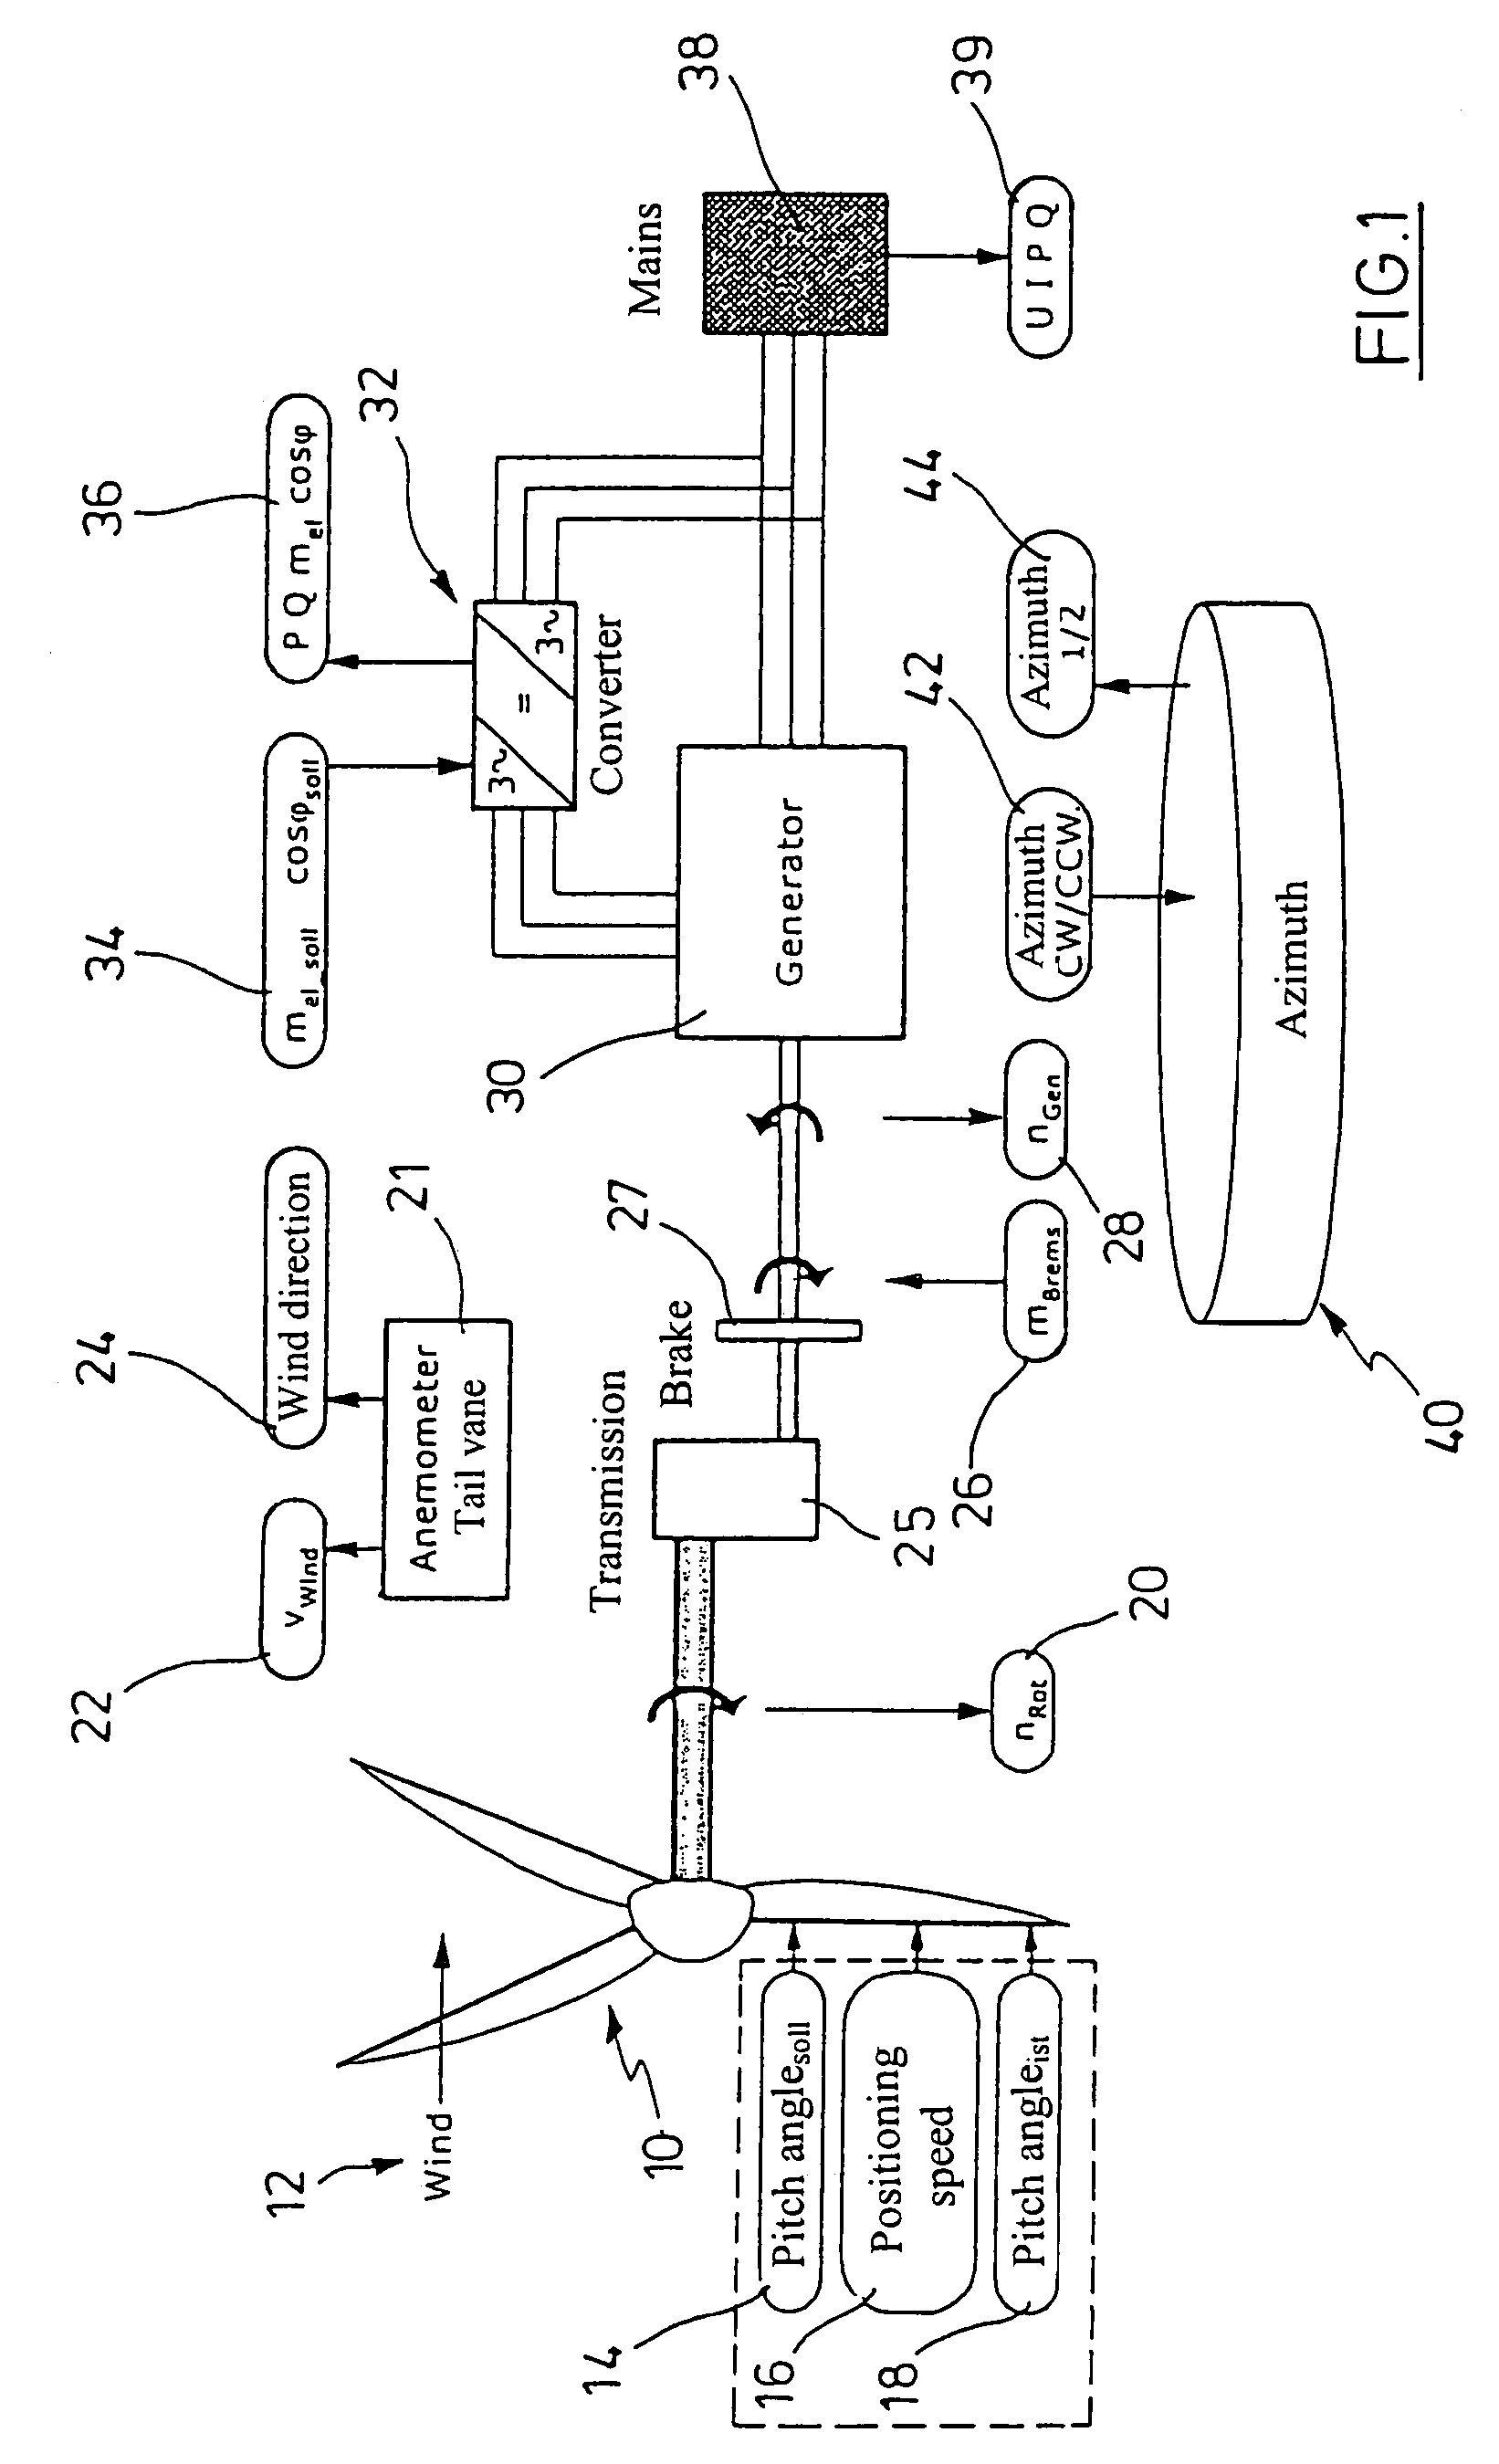 Device and method for a functional test of one wind turbine generator plant